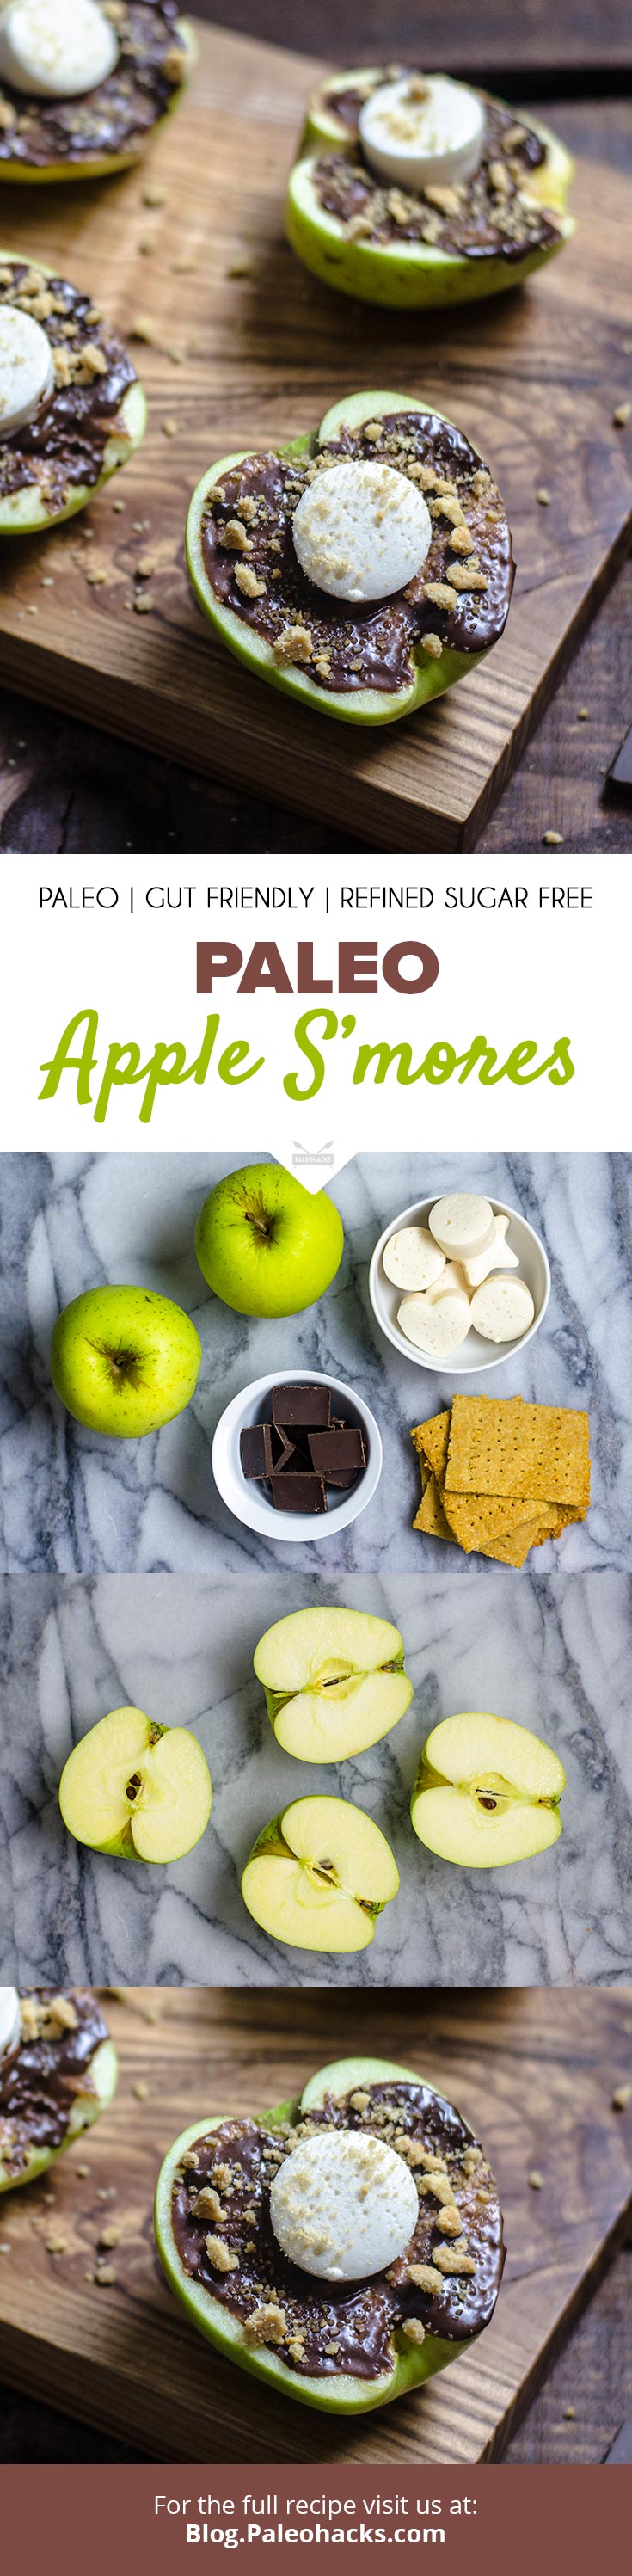 Bring your favorite campfire dessert to the kitchen with this apple twist on traditional s’mores. This recipe uses green apples for a sweet and tart flavor.